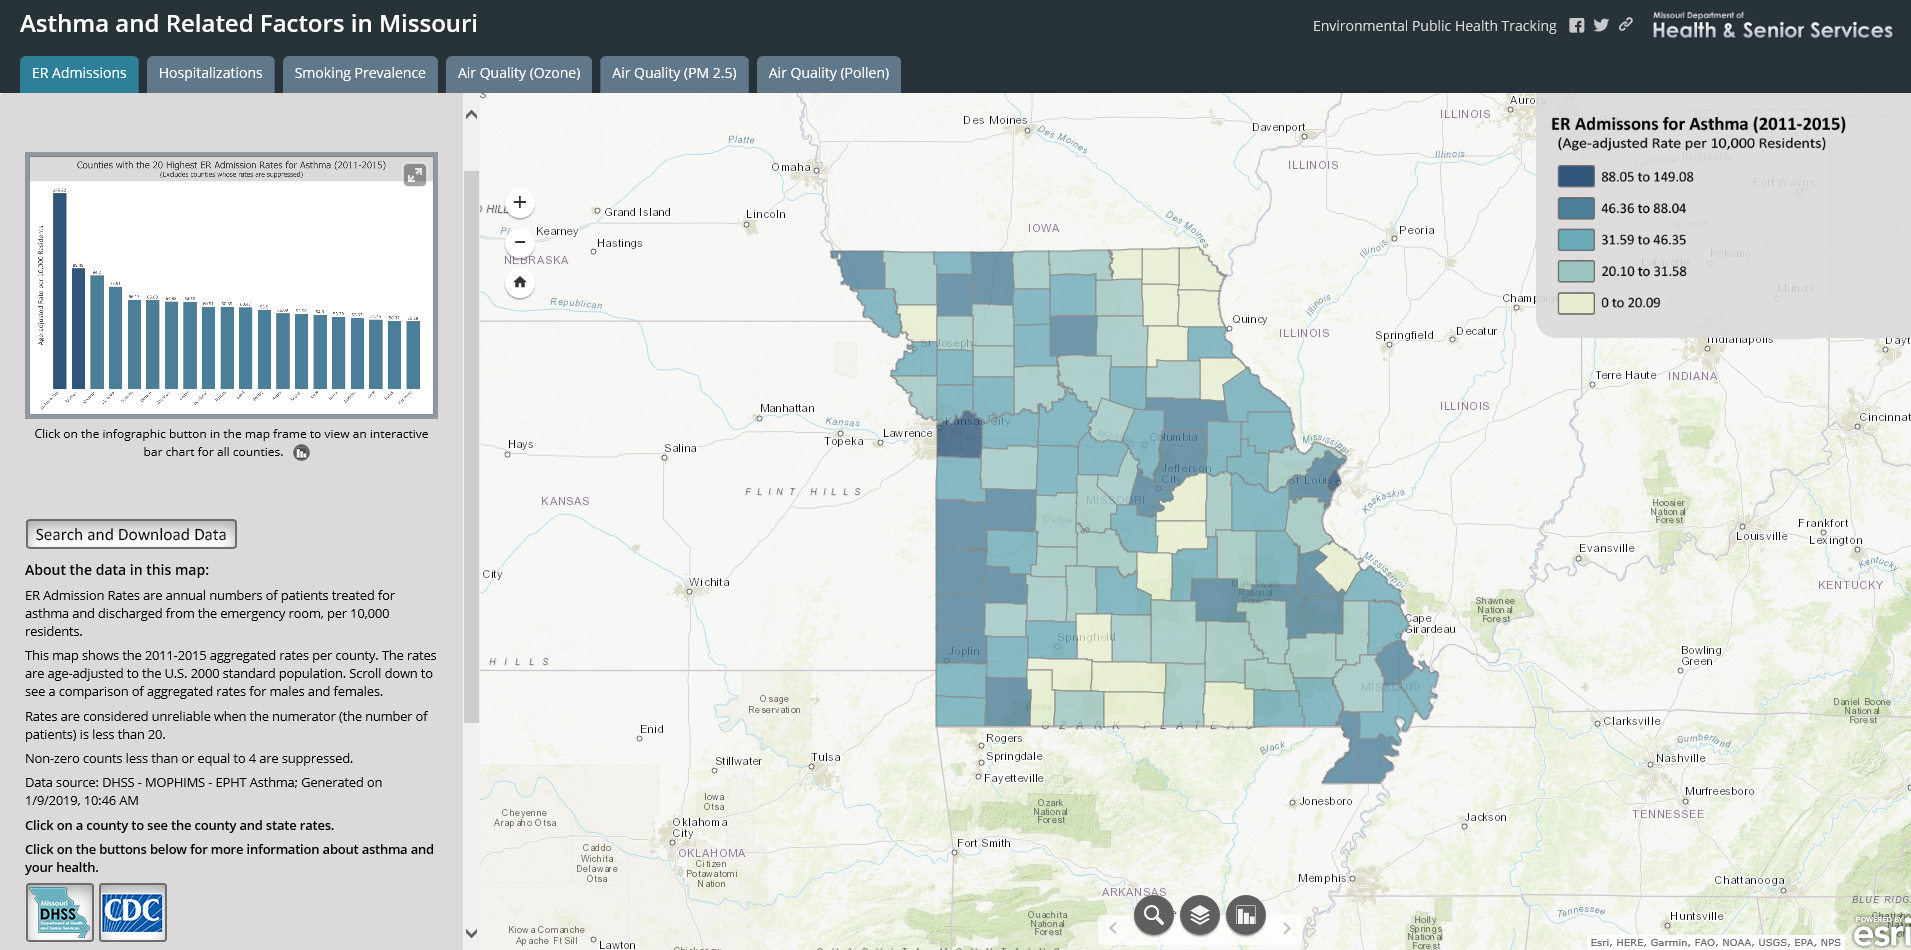 Missouri Trackings Maps of ASthma and Related Factors